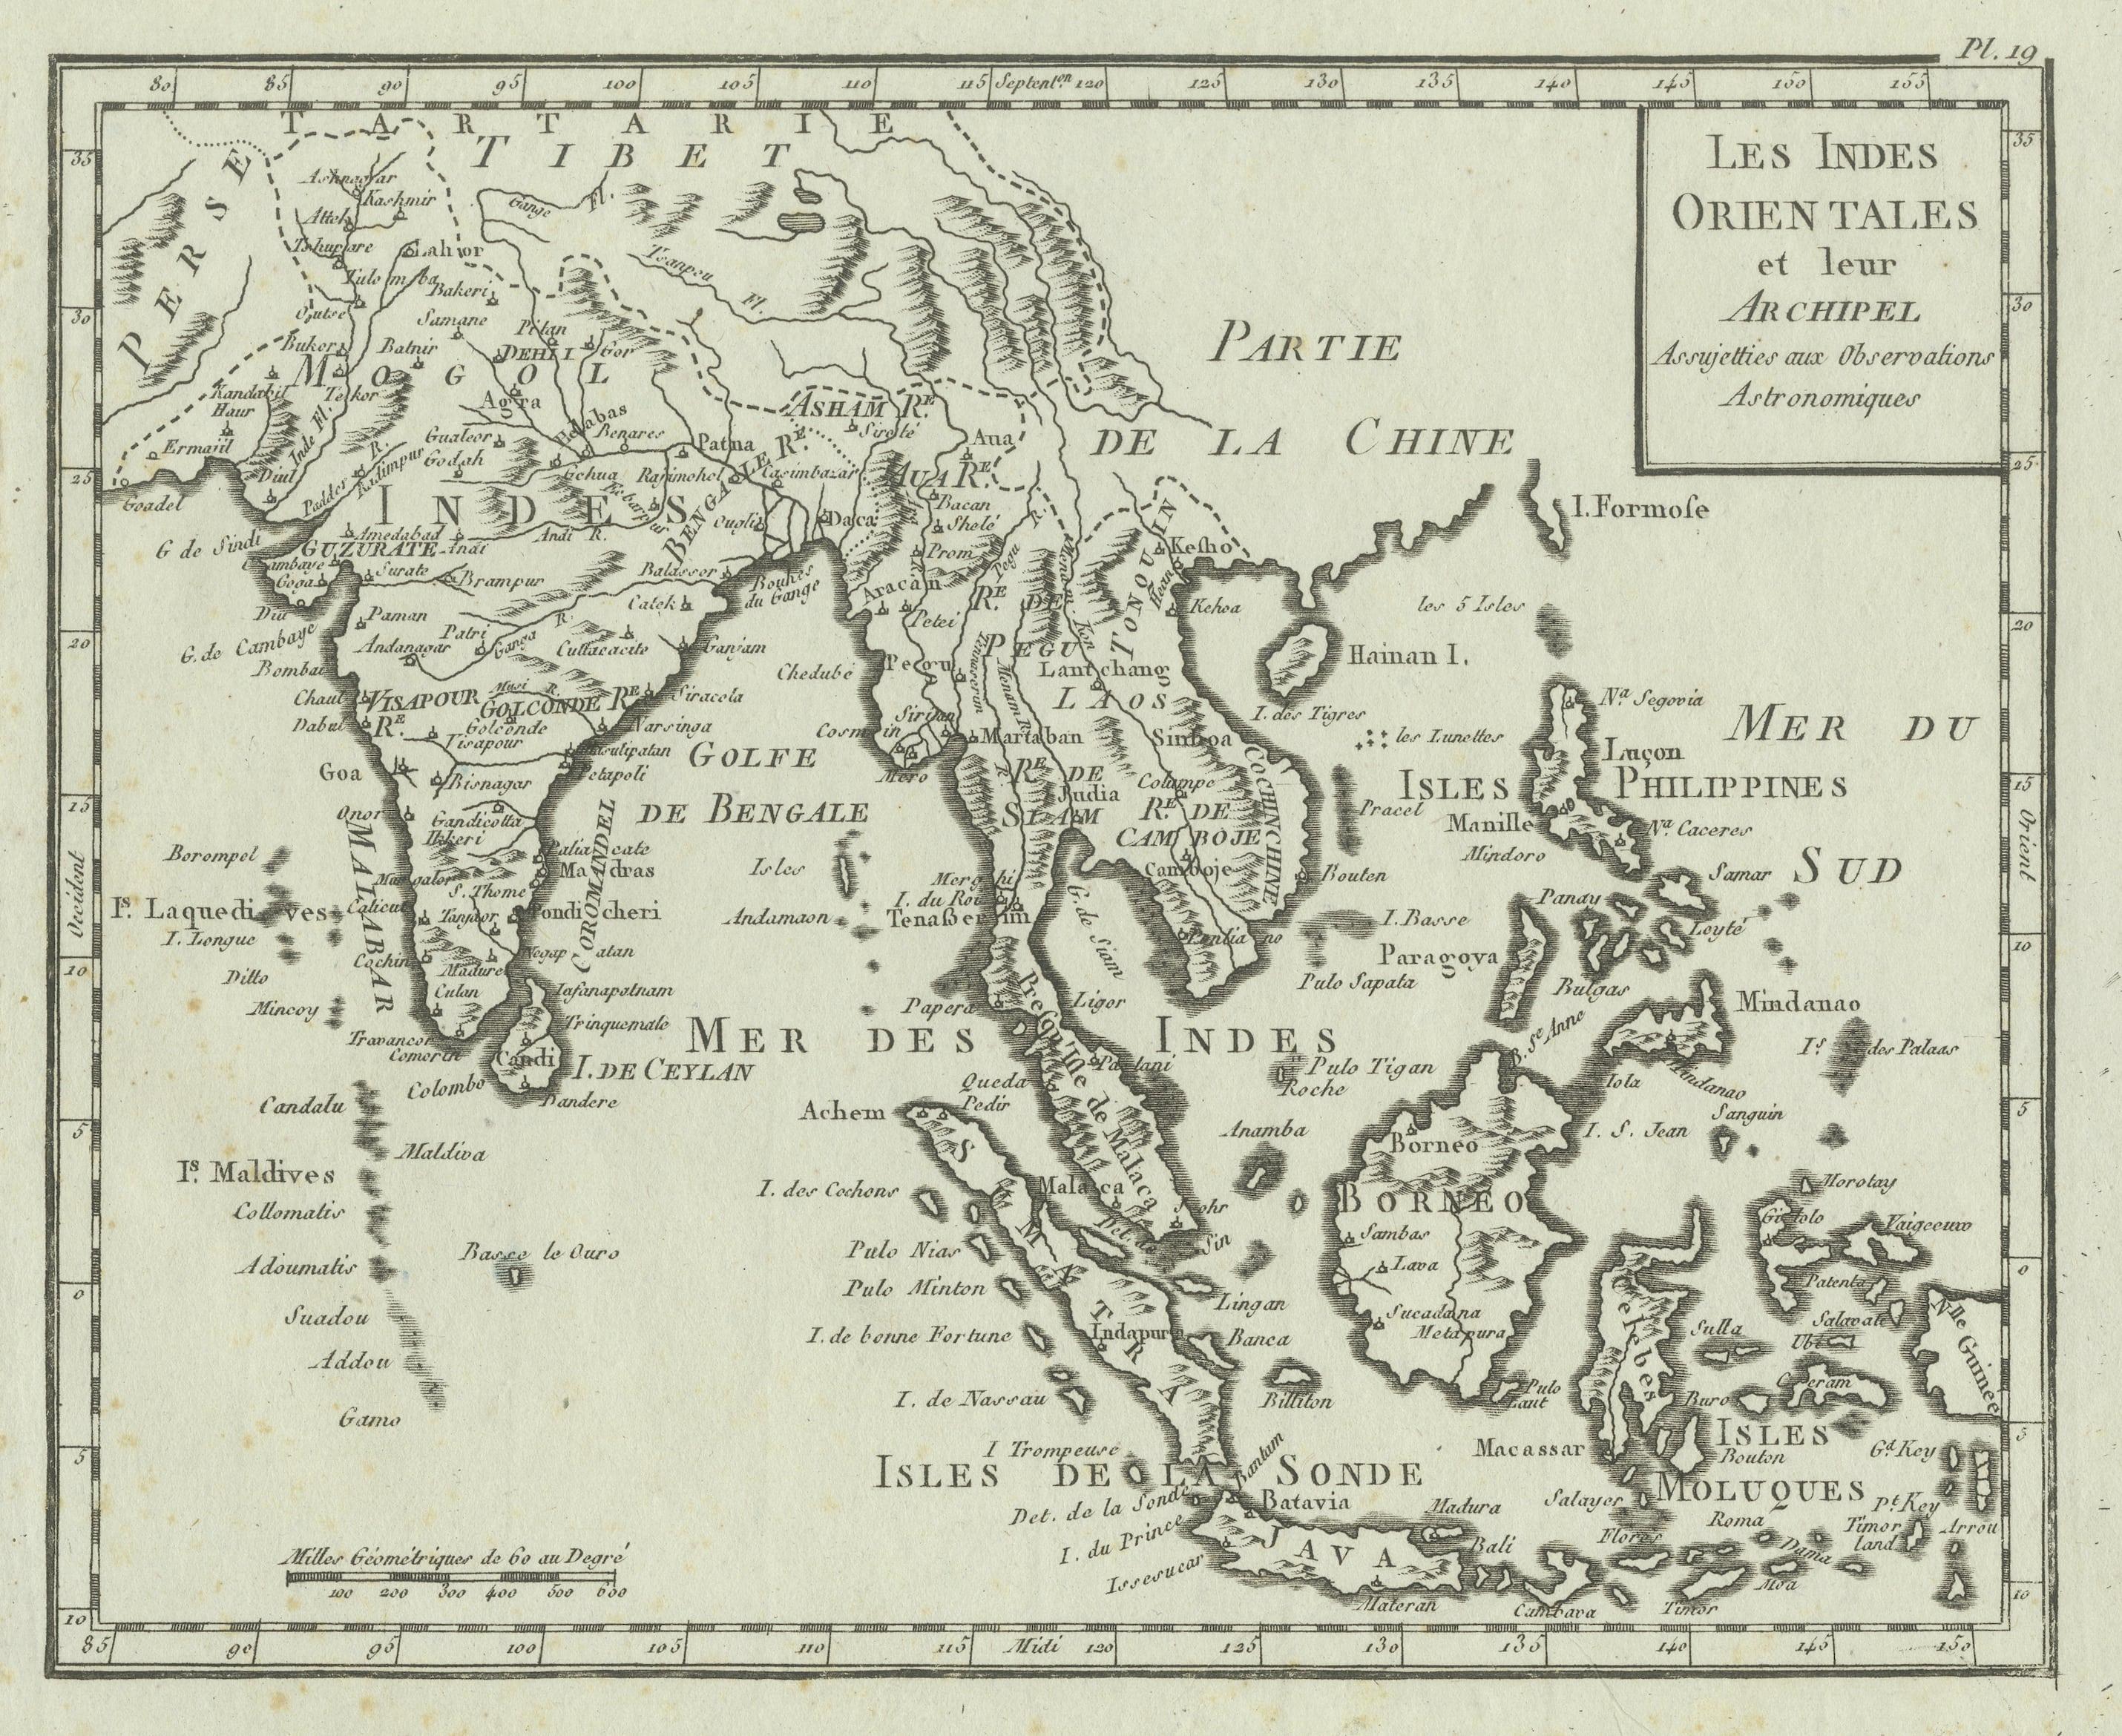 Antique map titled 'Les Indes Orientales et leur Archipel'. Original antique map of India, the East Indies and the Philippines. Source unknown, to be determined. Published circa 1760.